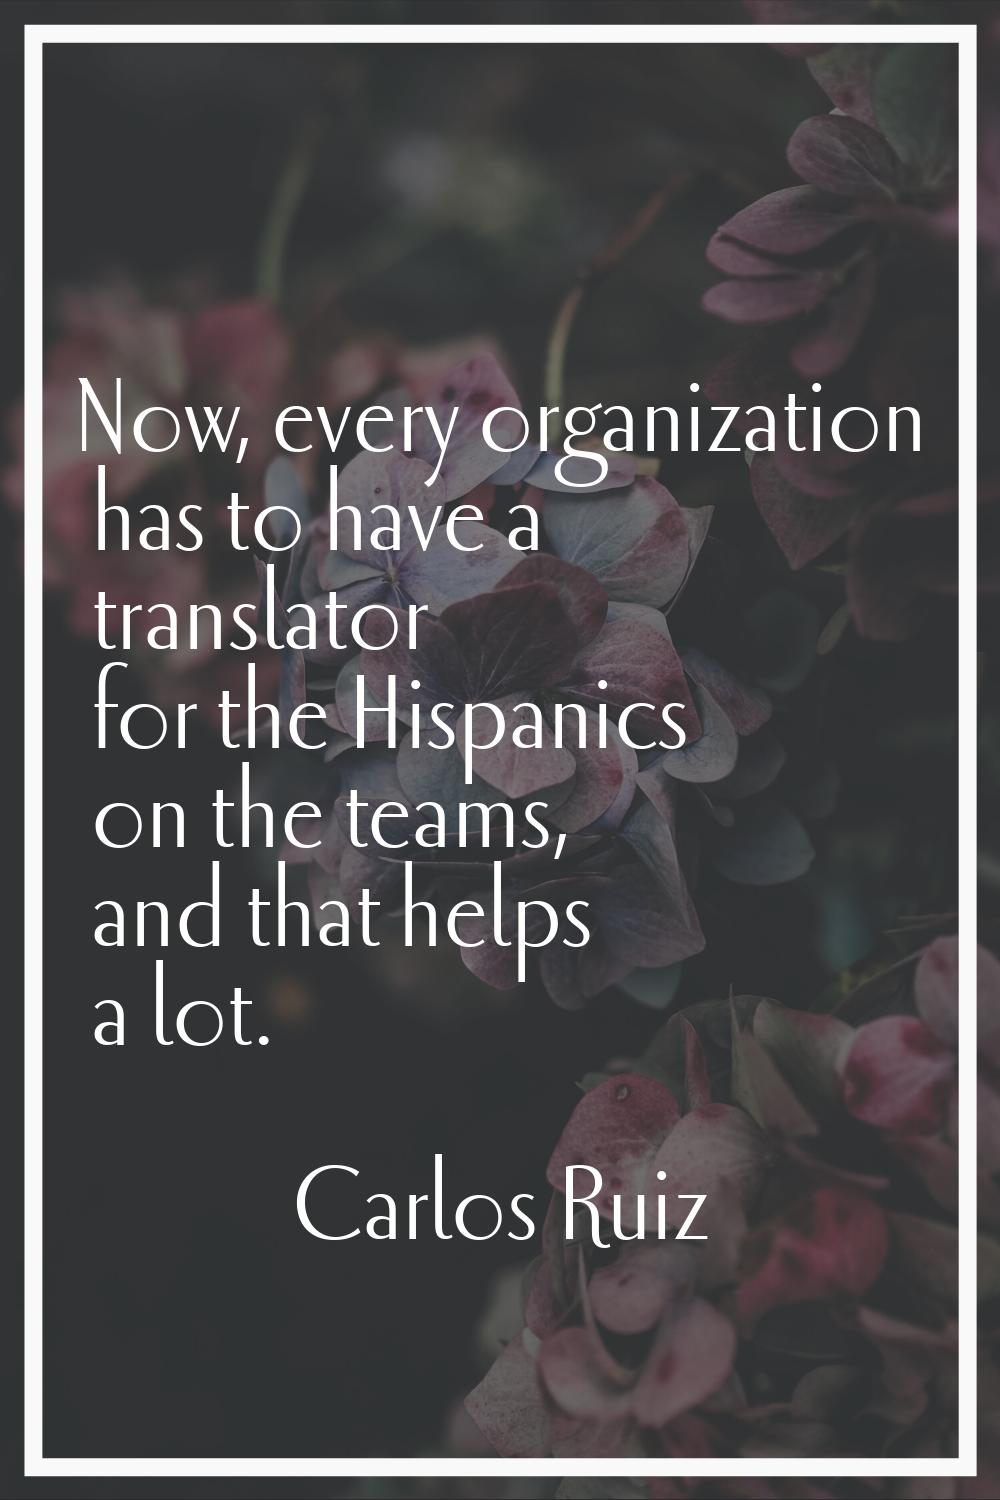 Now, every organization has to have a translator for the Hispanics on the teams, and that helps a l